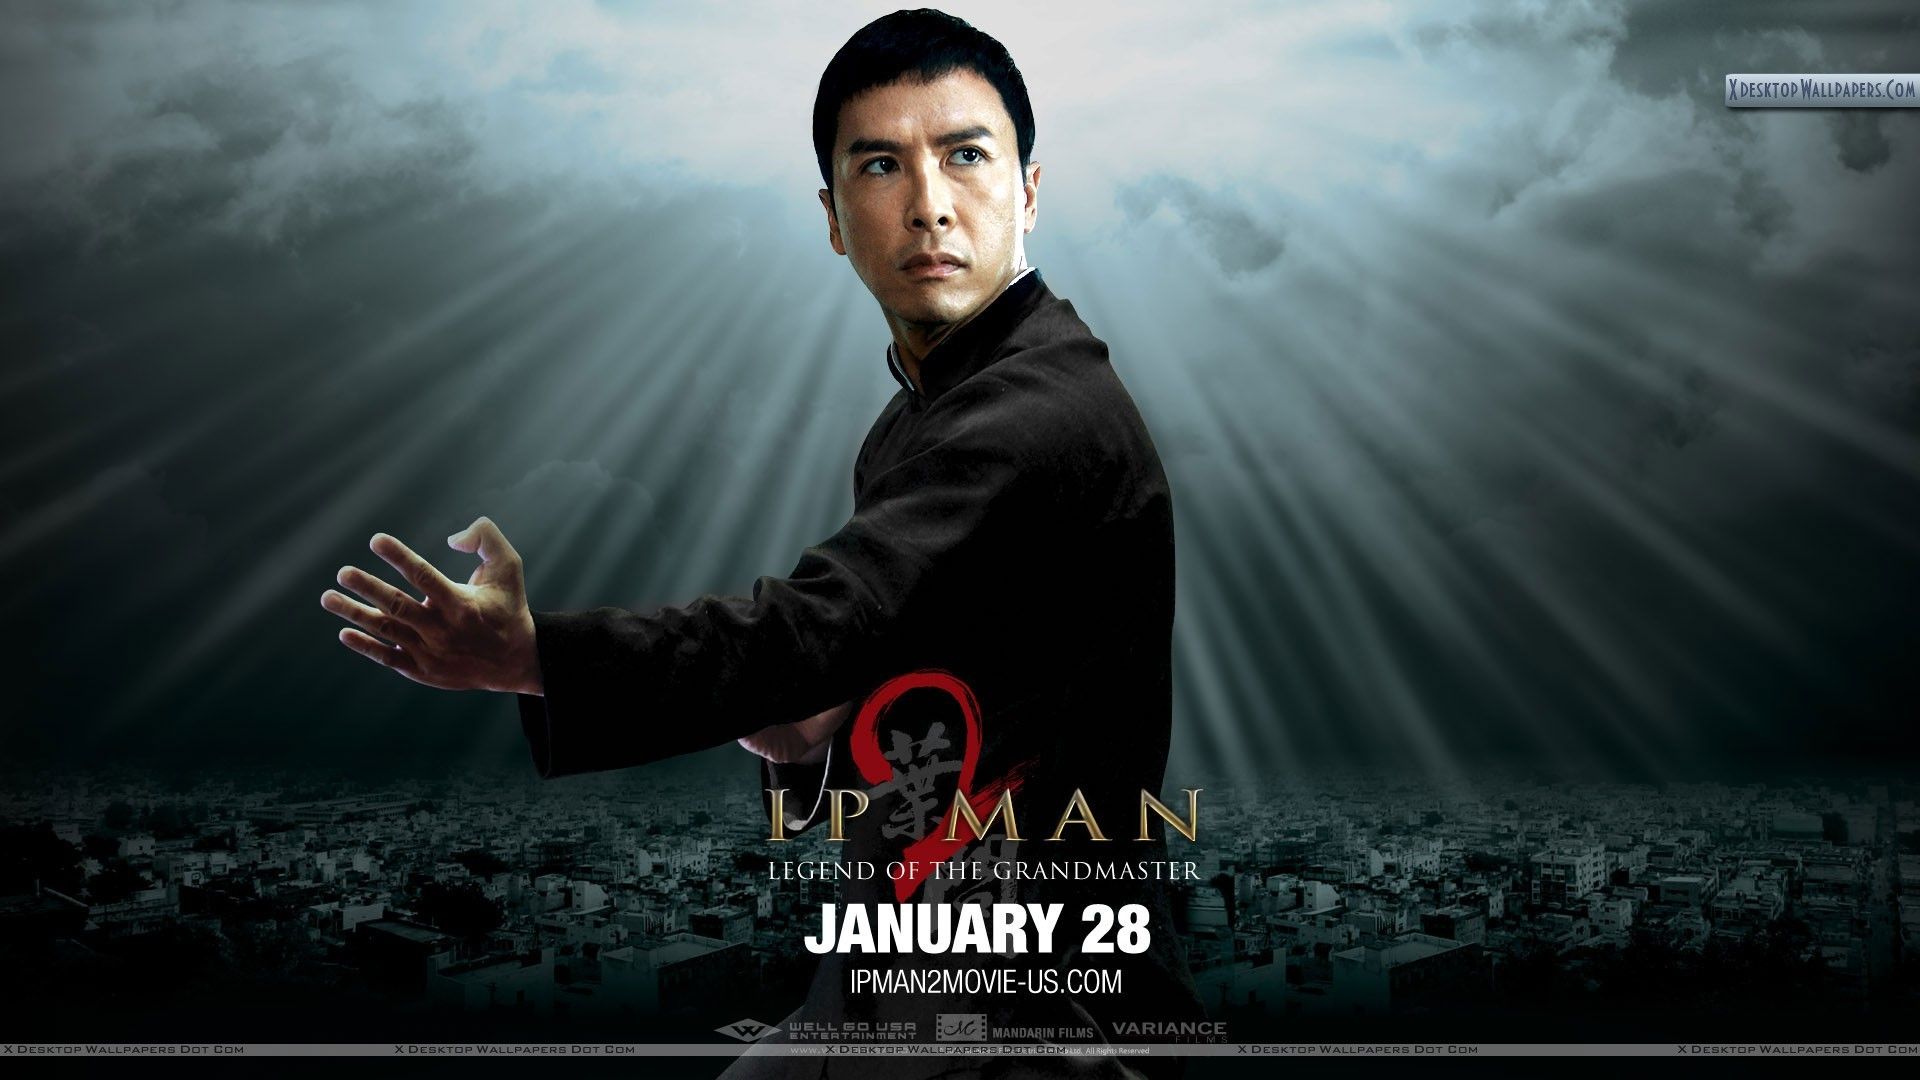 Ip man II official release poster